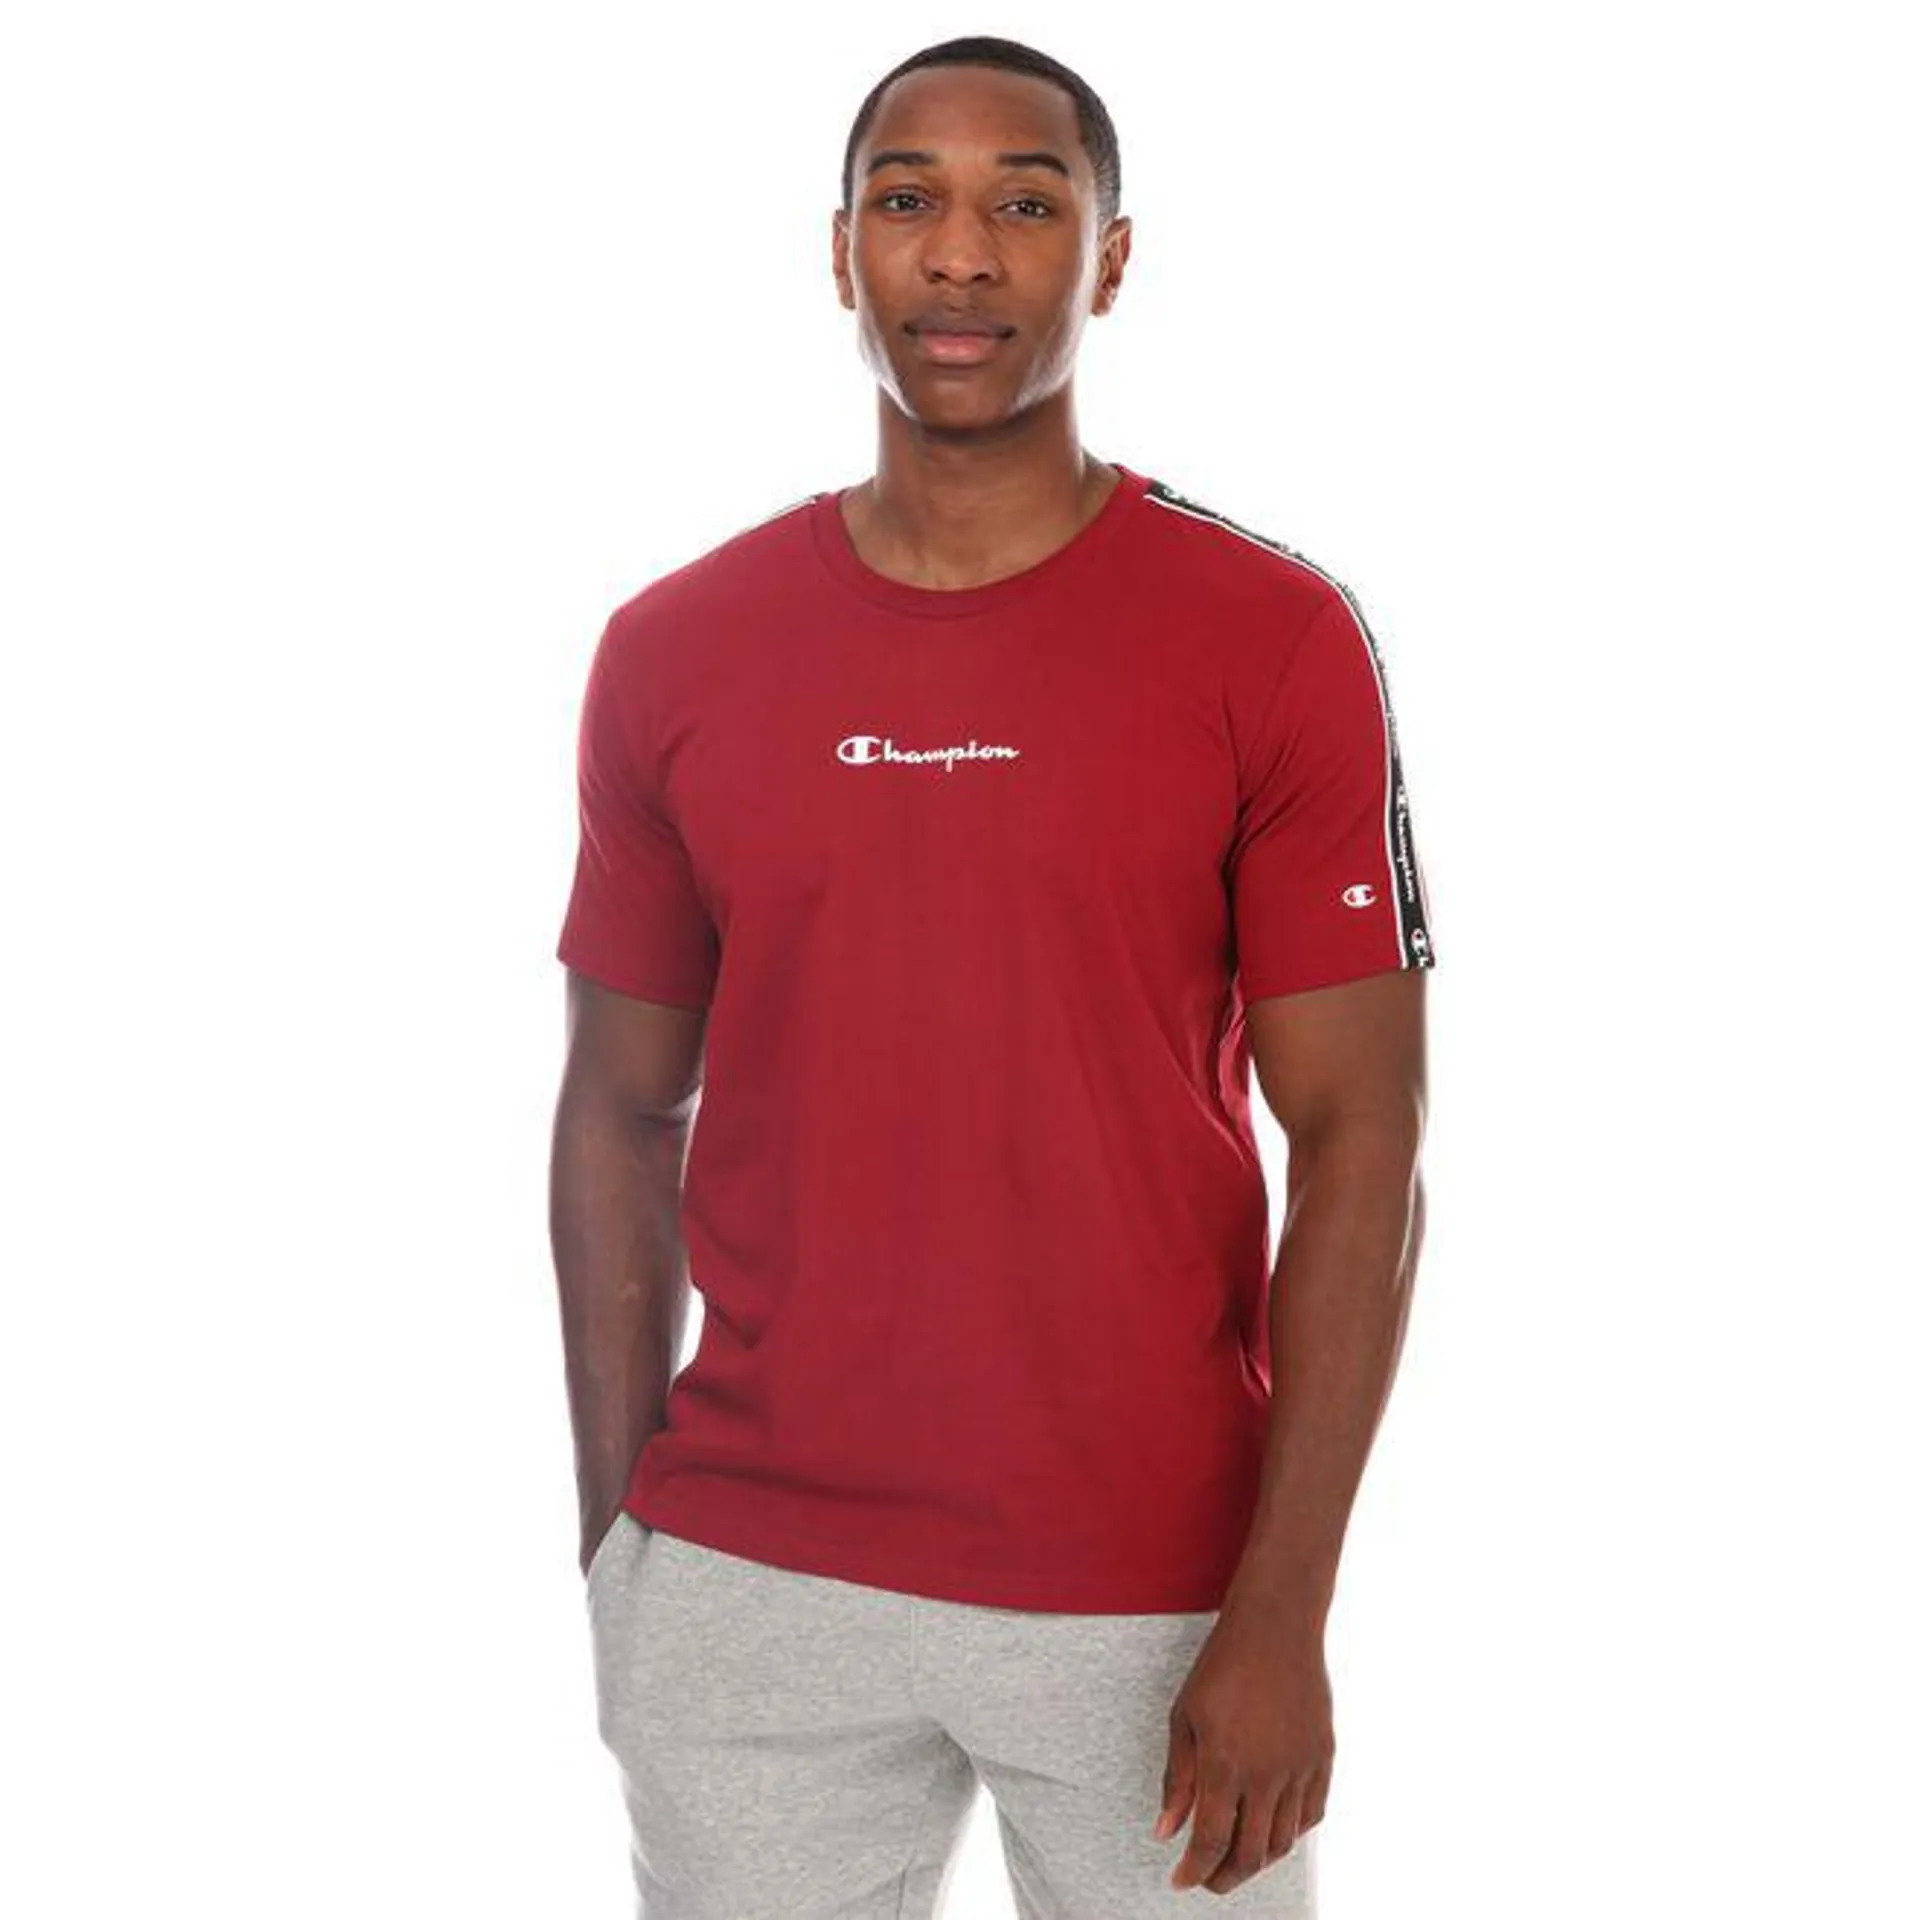 Champion Mens Crew Neck T-Shirt in Red